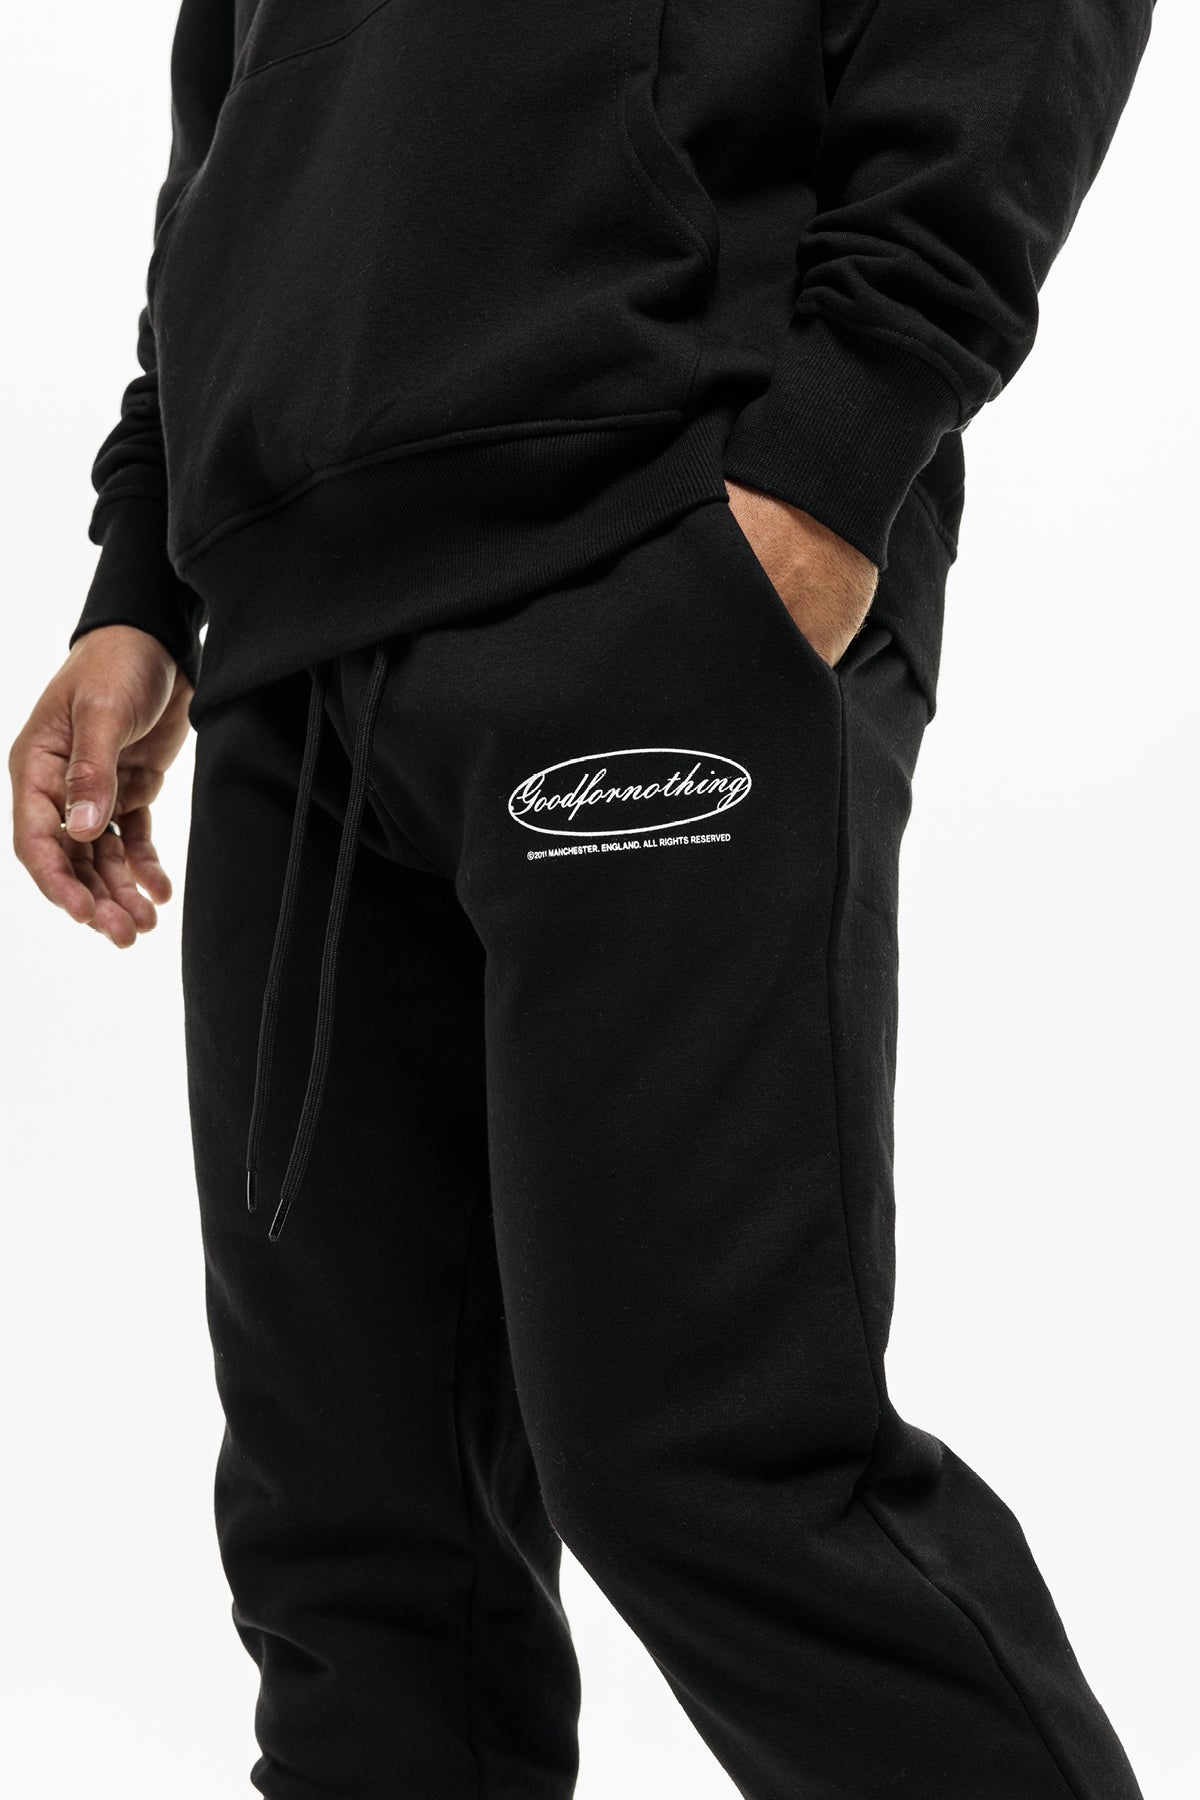 Sustainable Oval Black Jogger